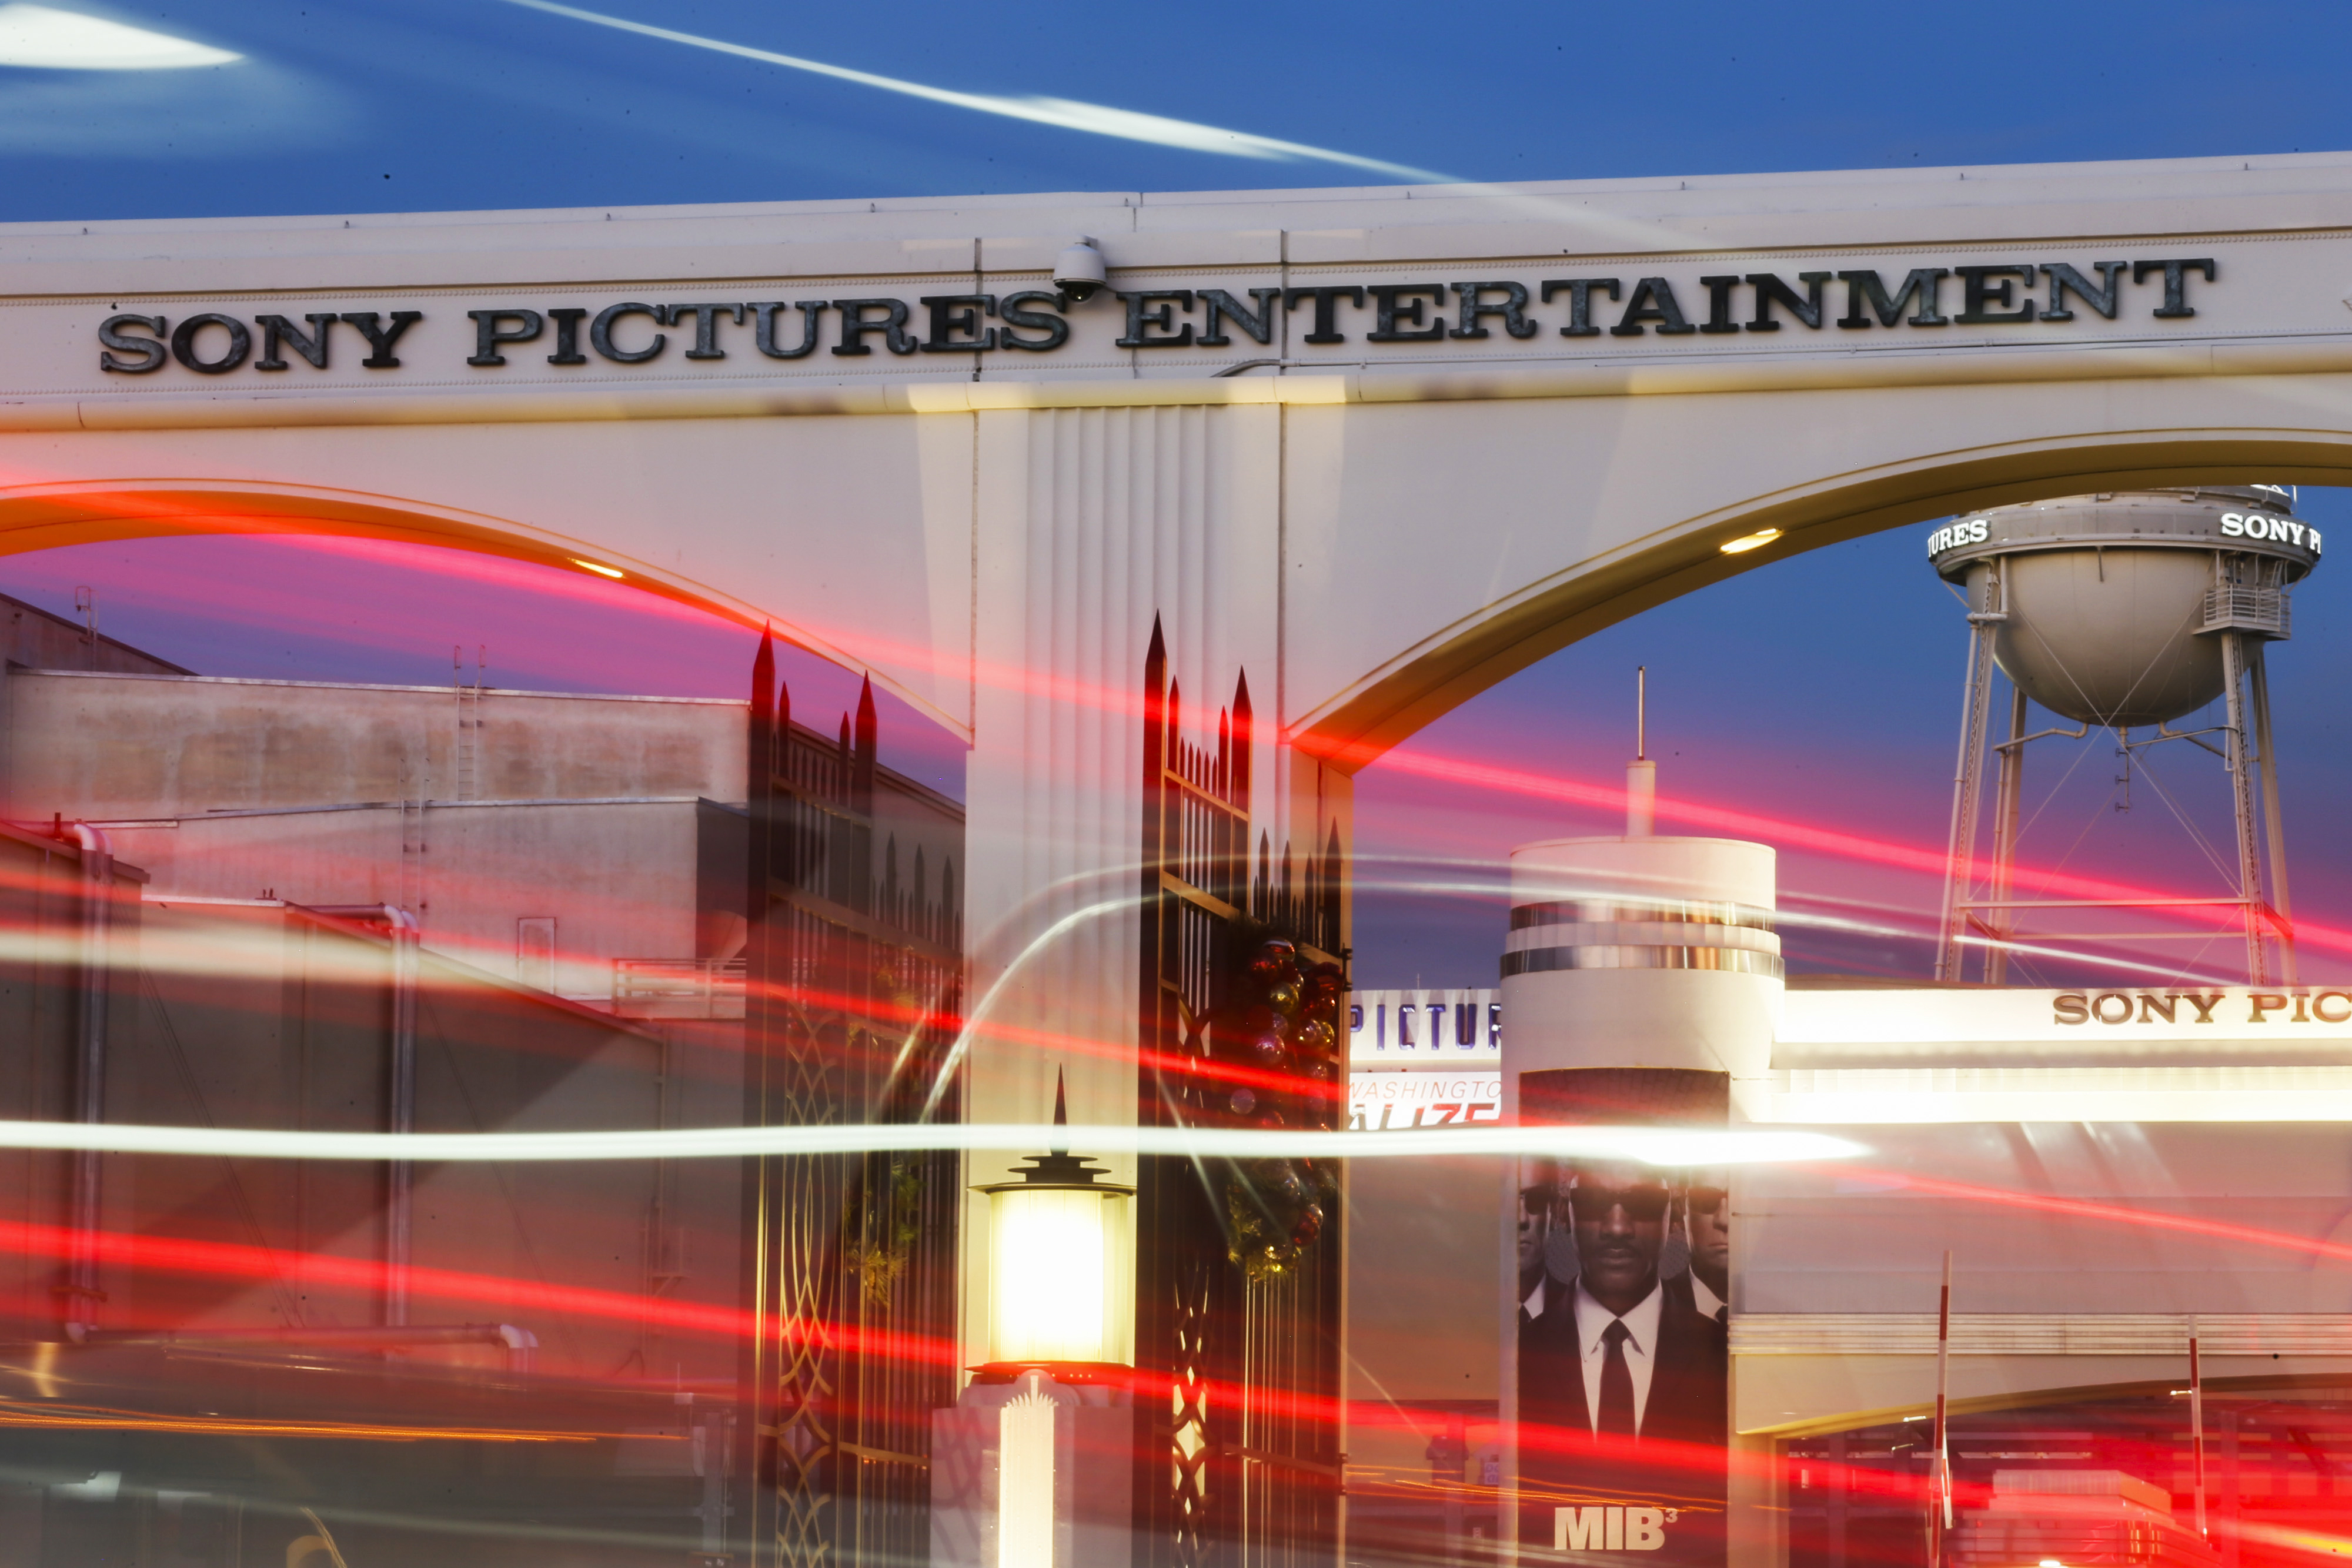 Signage is displayed at the Sony Pictures Entertainment Inc. studios in Culver City, California, U.S., on Thursday, Dec. 18, 2014, after an alleged hacking by North Korea of the company. (Patrick T. Fallon—Bloomberg/Getty Images)